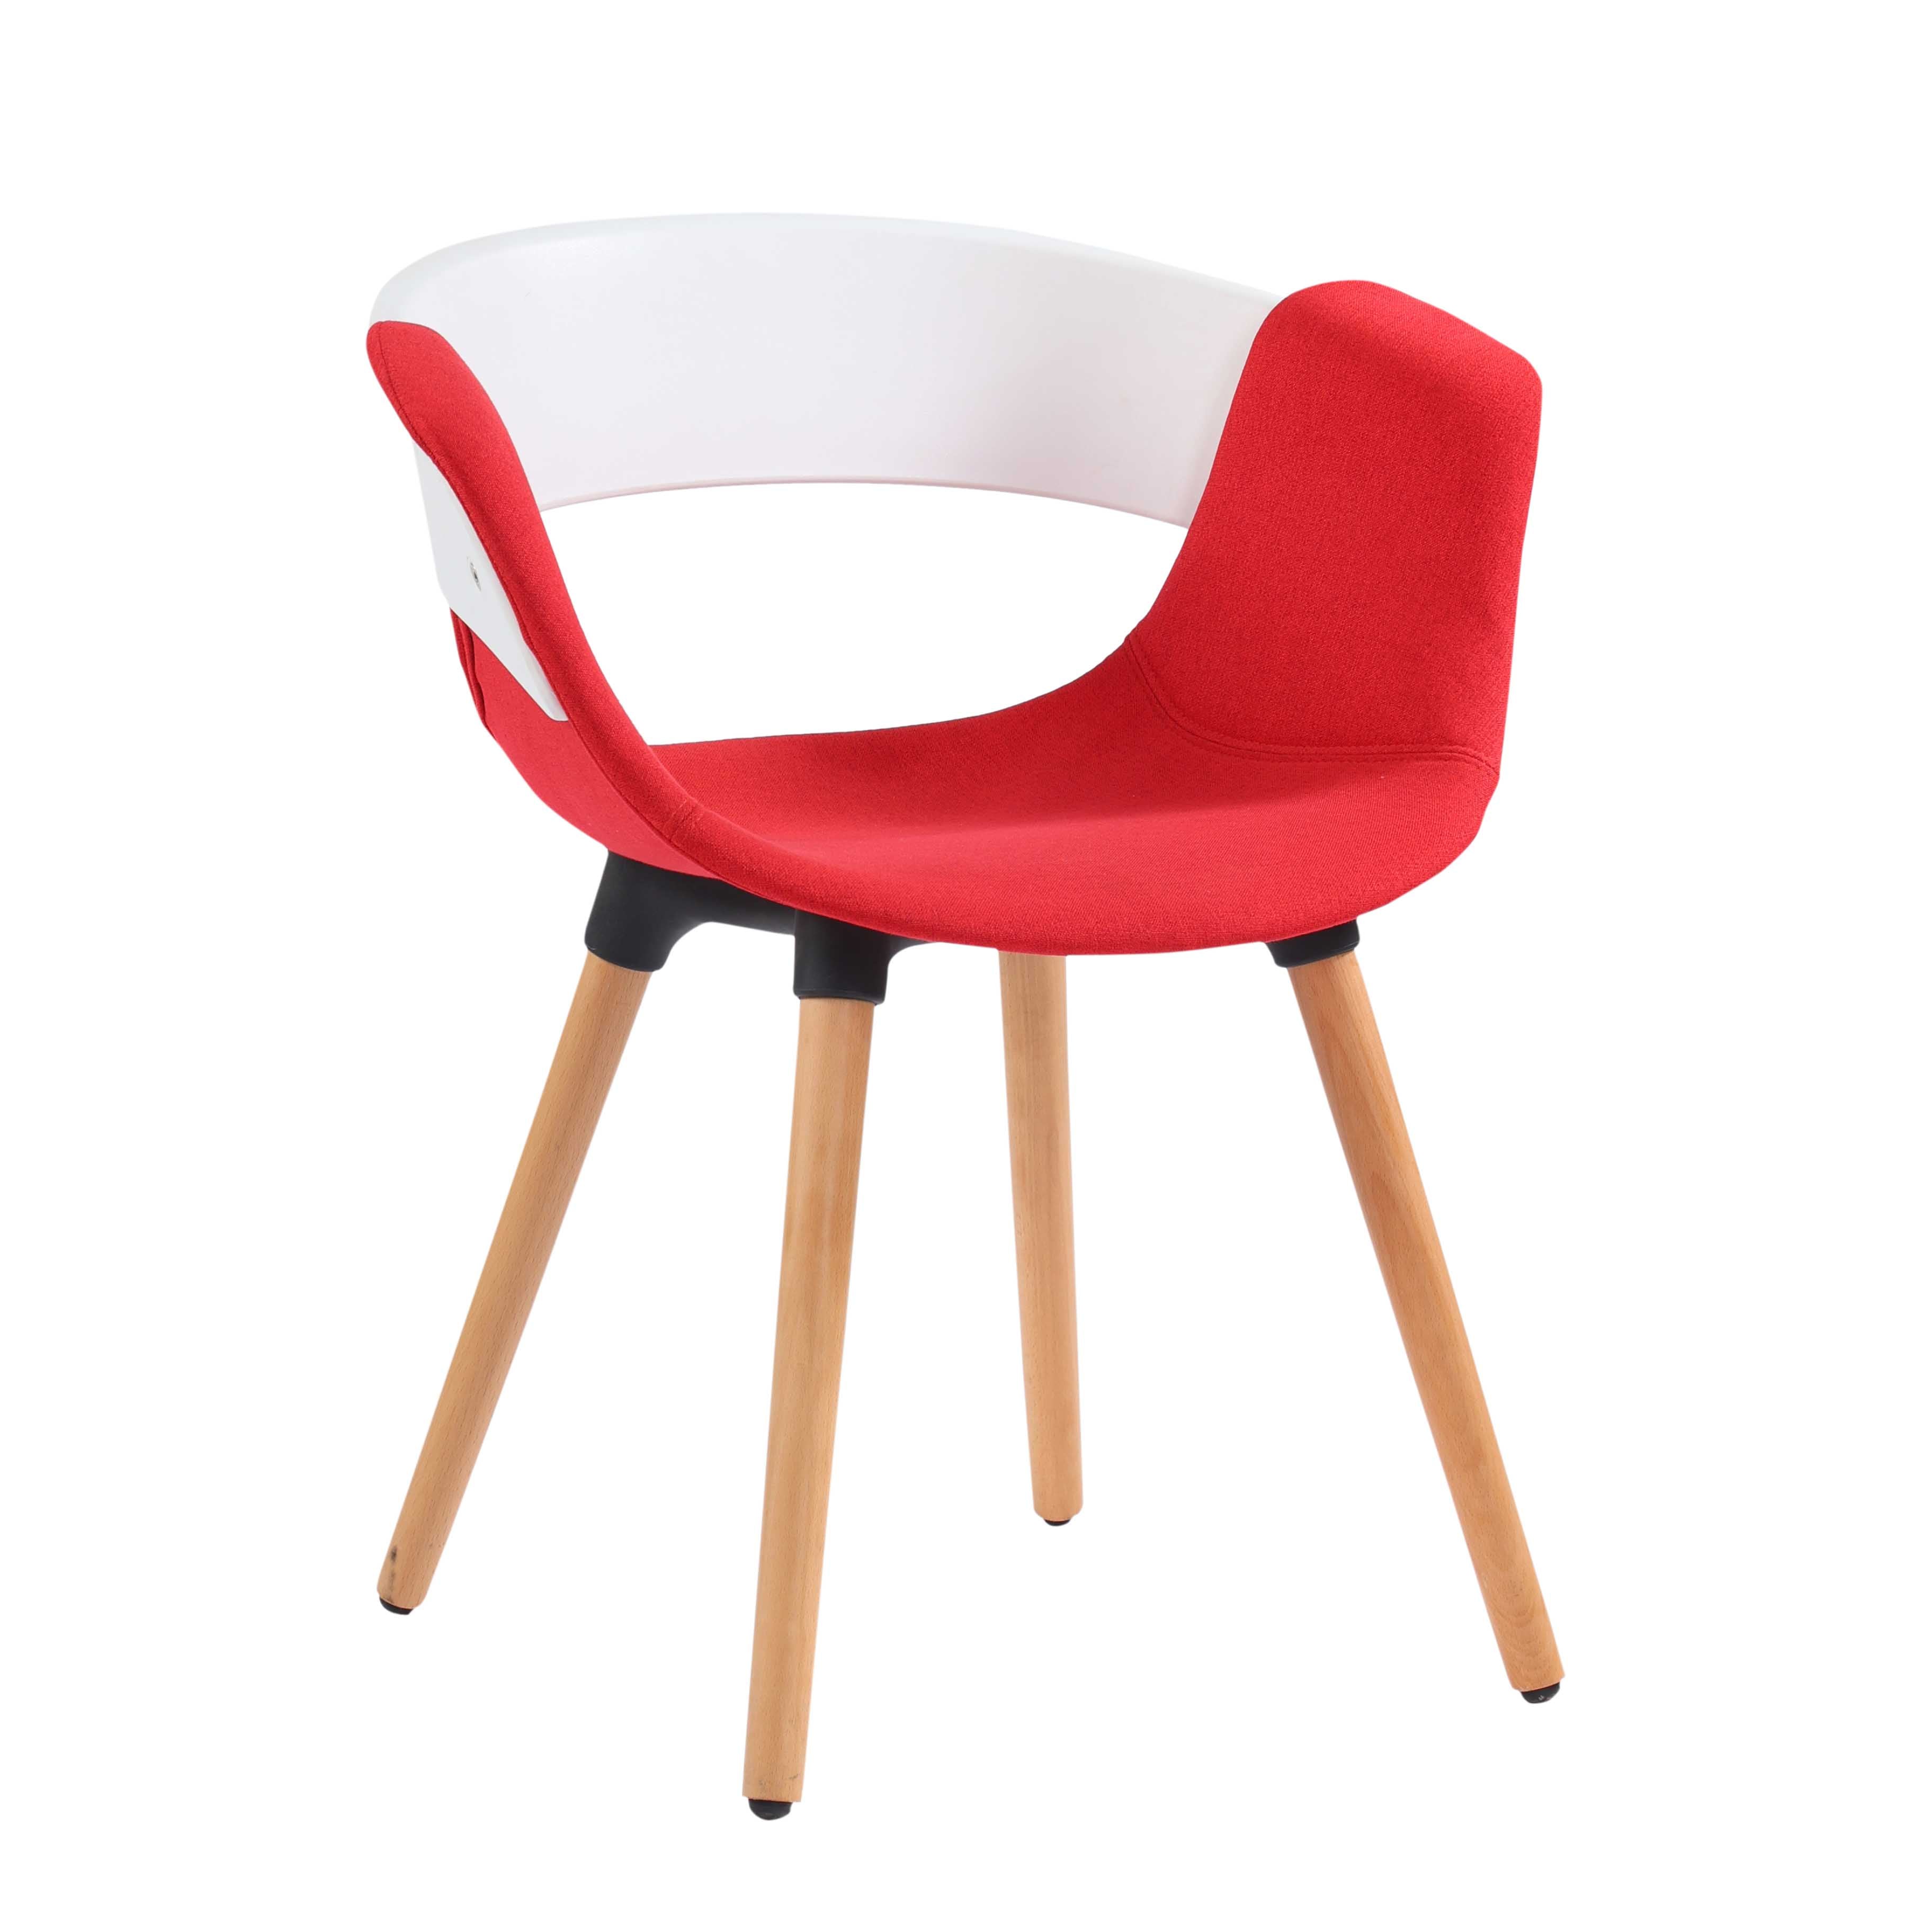 Casper Contemporary Armrest Cafe Chair with Wooden Legs - Red